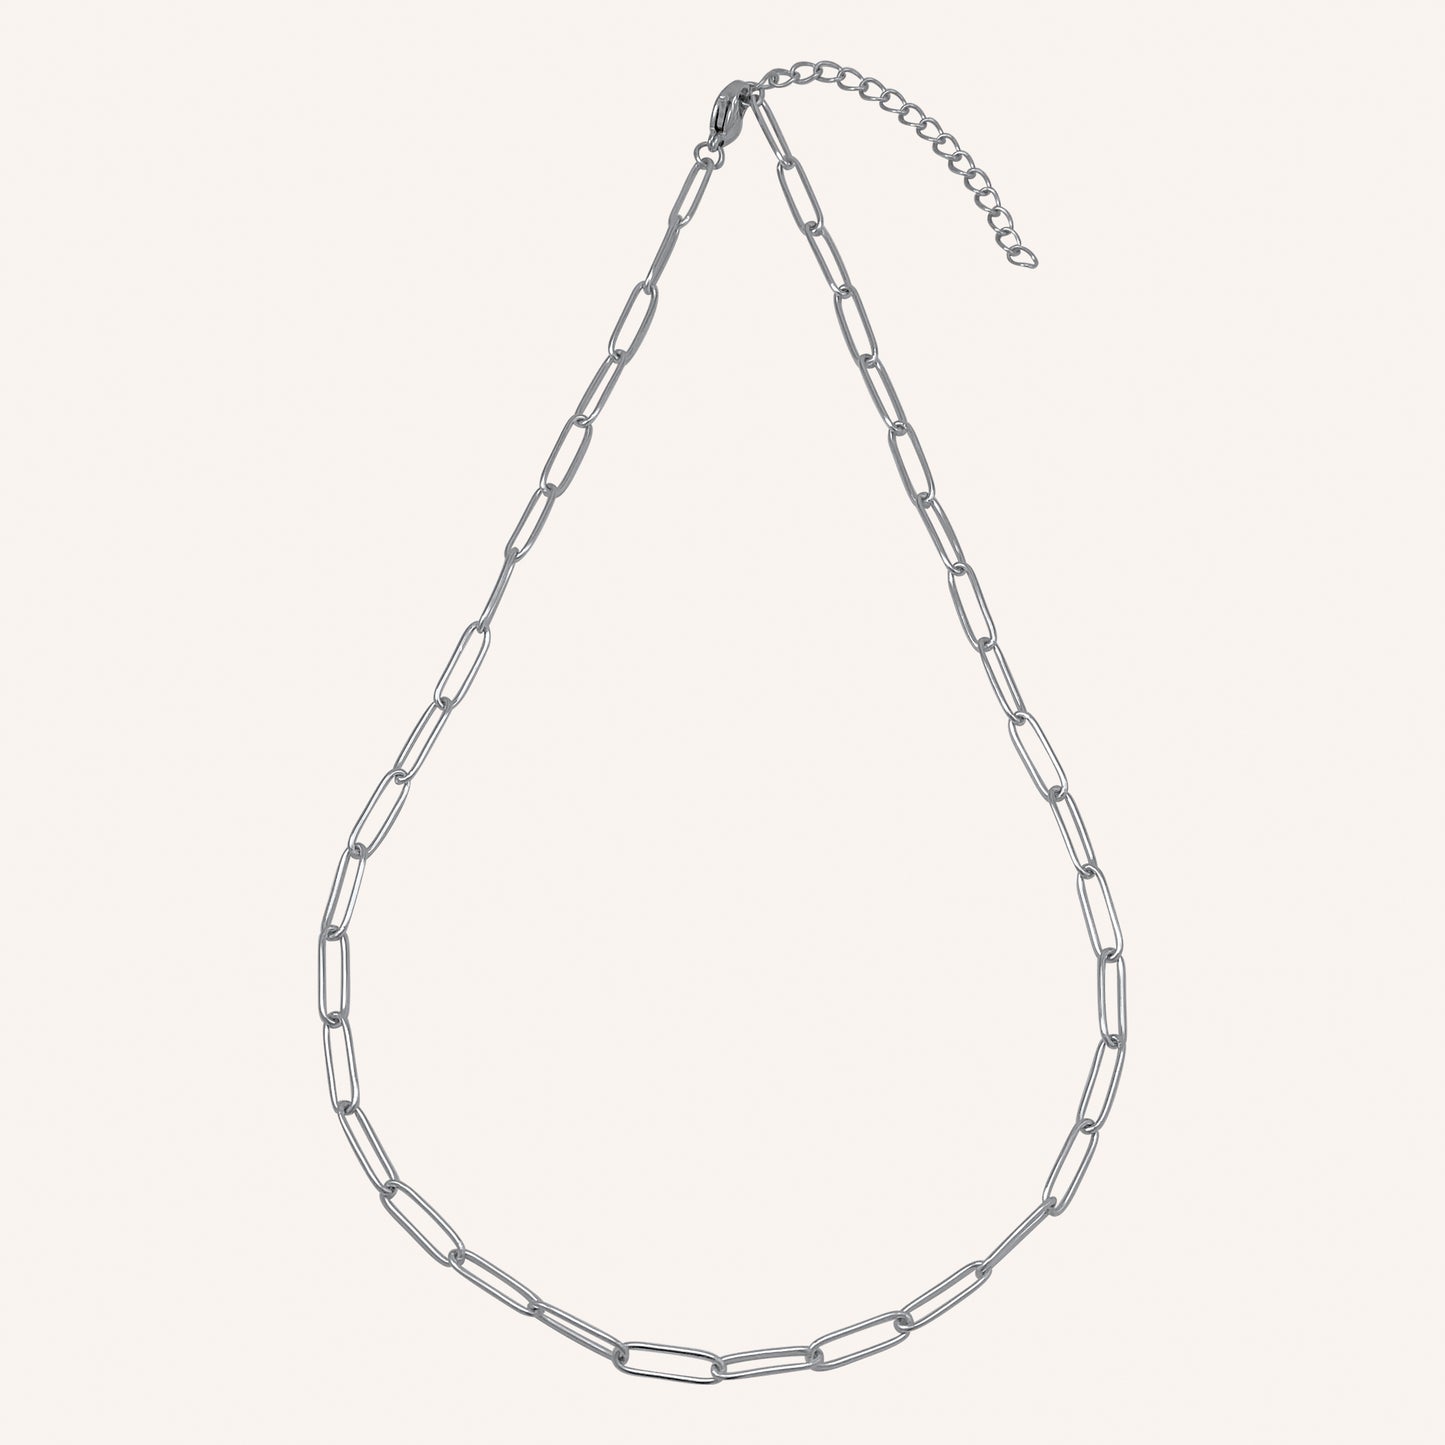 Mea Chain Link Choker Necklace - Silver